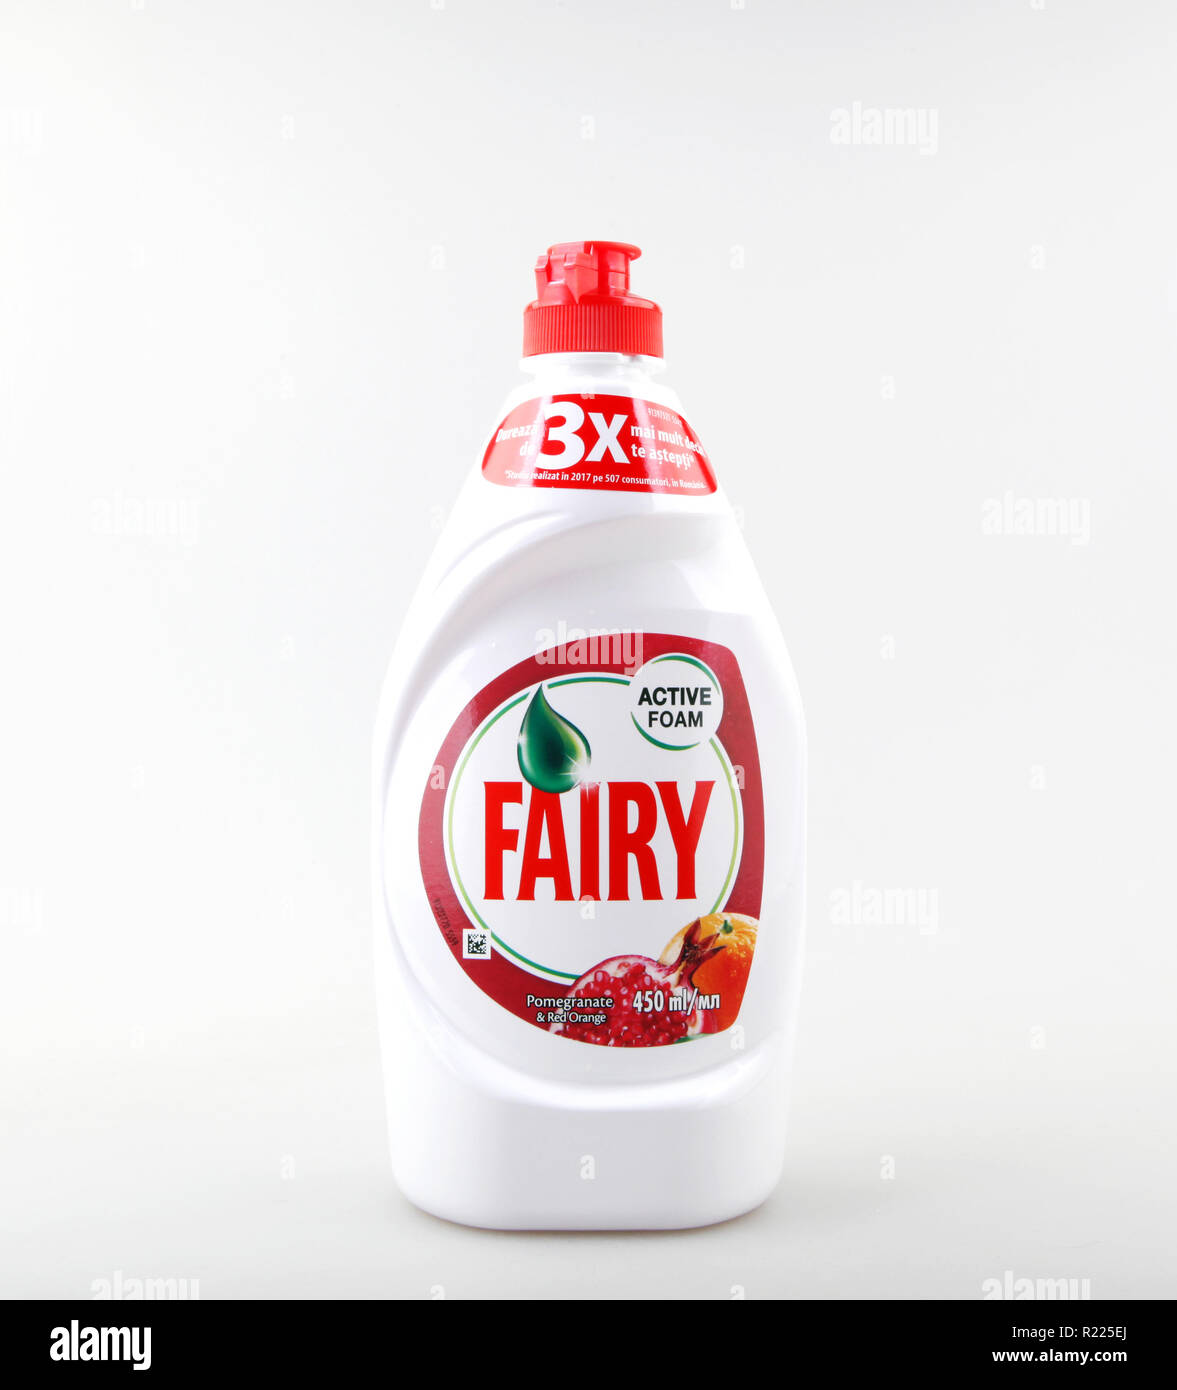 Pomorie, Bulgaria - November 15, 2018: Fairy dish washing liquid. Fairy is a brand of washing-up liquid produced by Procter & Gamble. Stock Photo